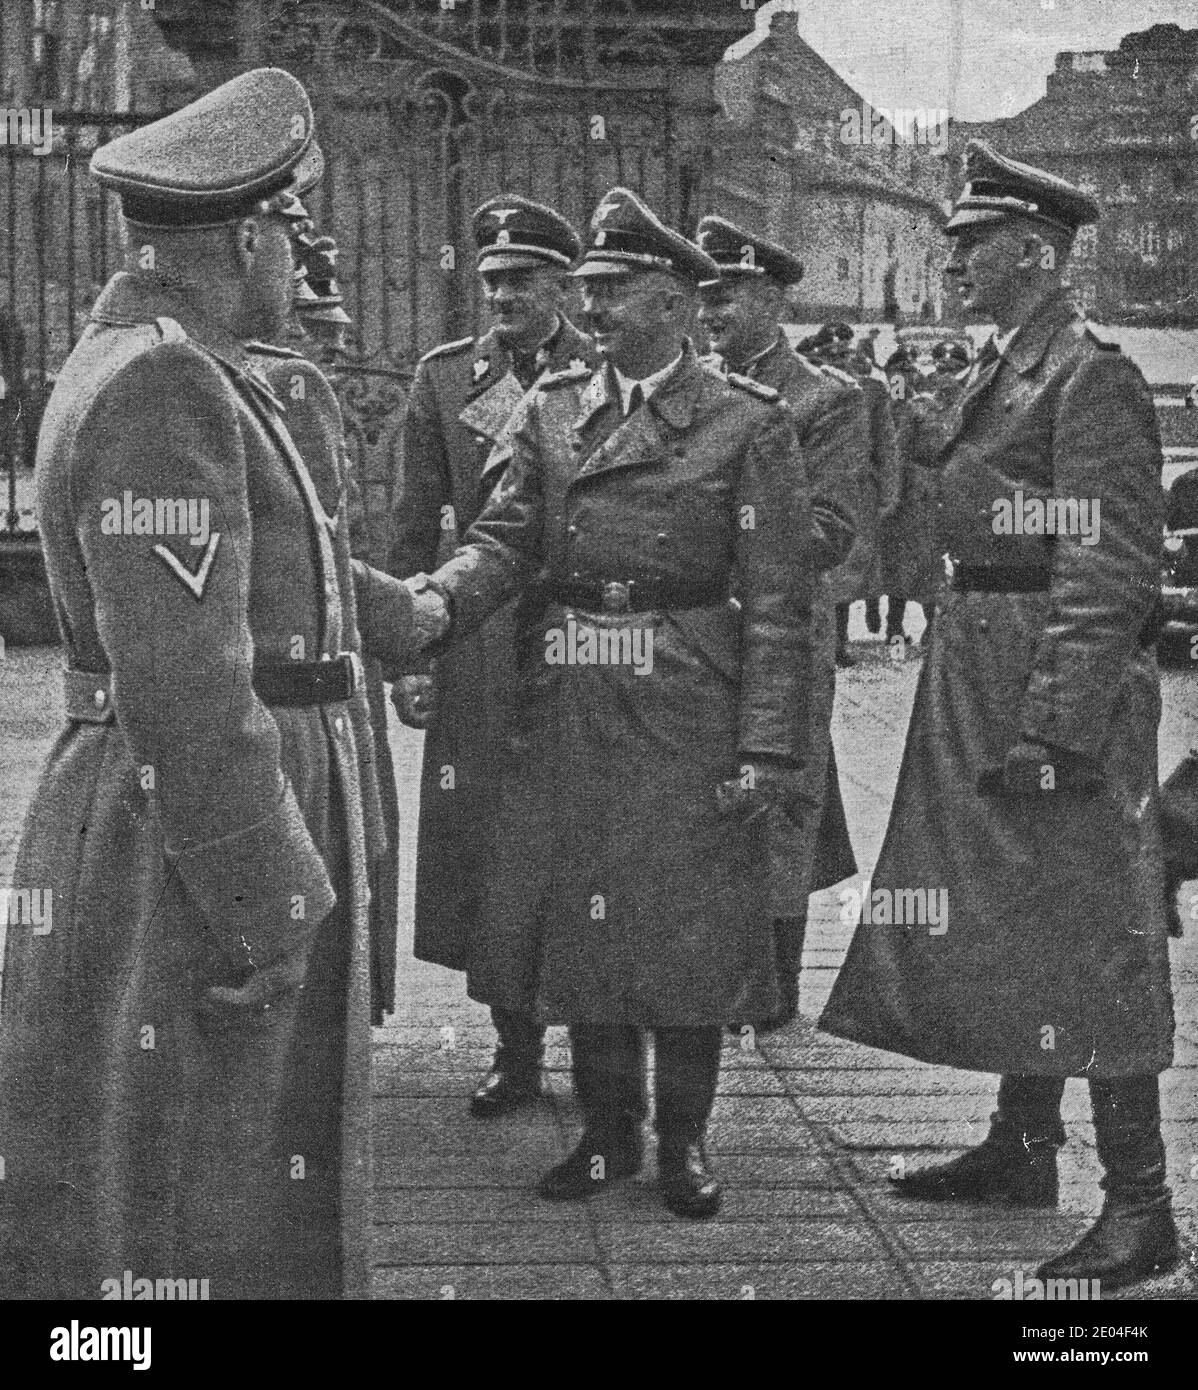 PRAGUE, PROTECTORATE OF BOHEMIA AND MORAVIA - OCTOBER 1941: Reichsfuhrer Heinrich Himmler greets others nazis at Prague castle. On the right is Reinha Stock Photo